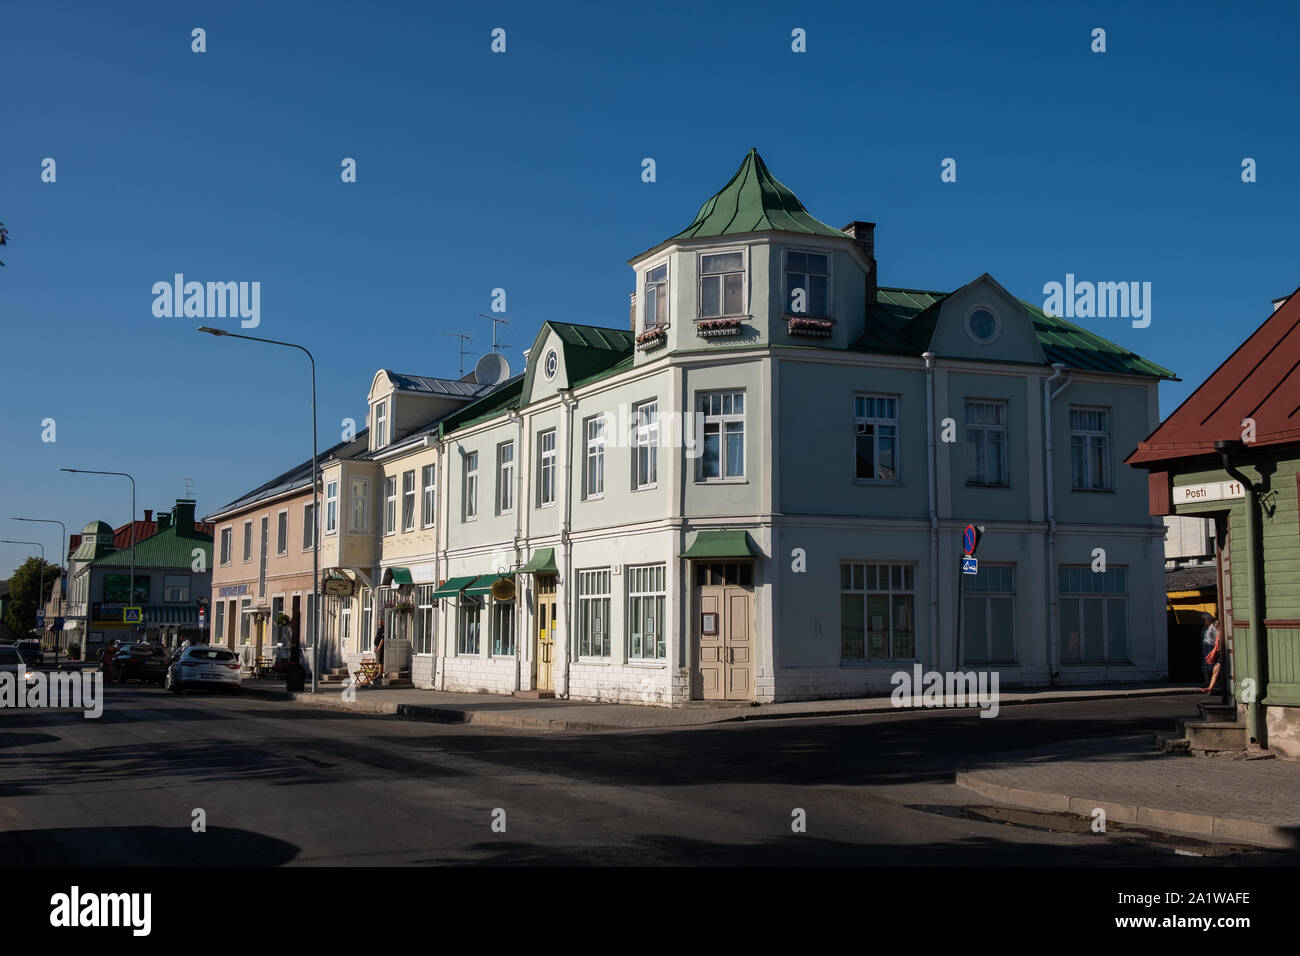 Traditional buildings in the town centre of Haapsalu, Hapsal, County Laanemae,Estonia Stock Photo